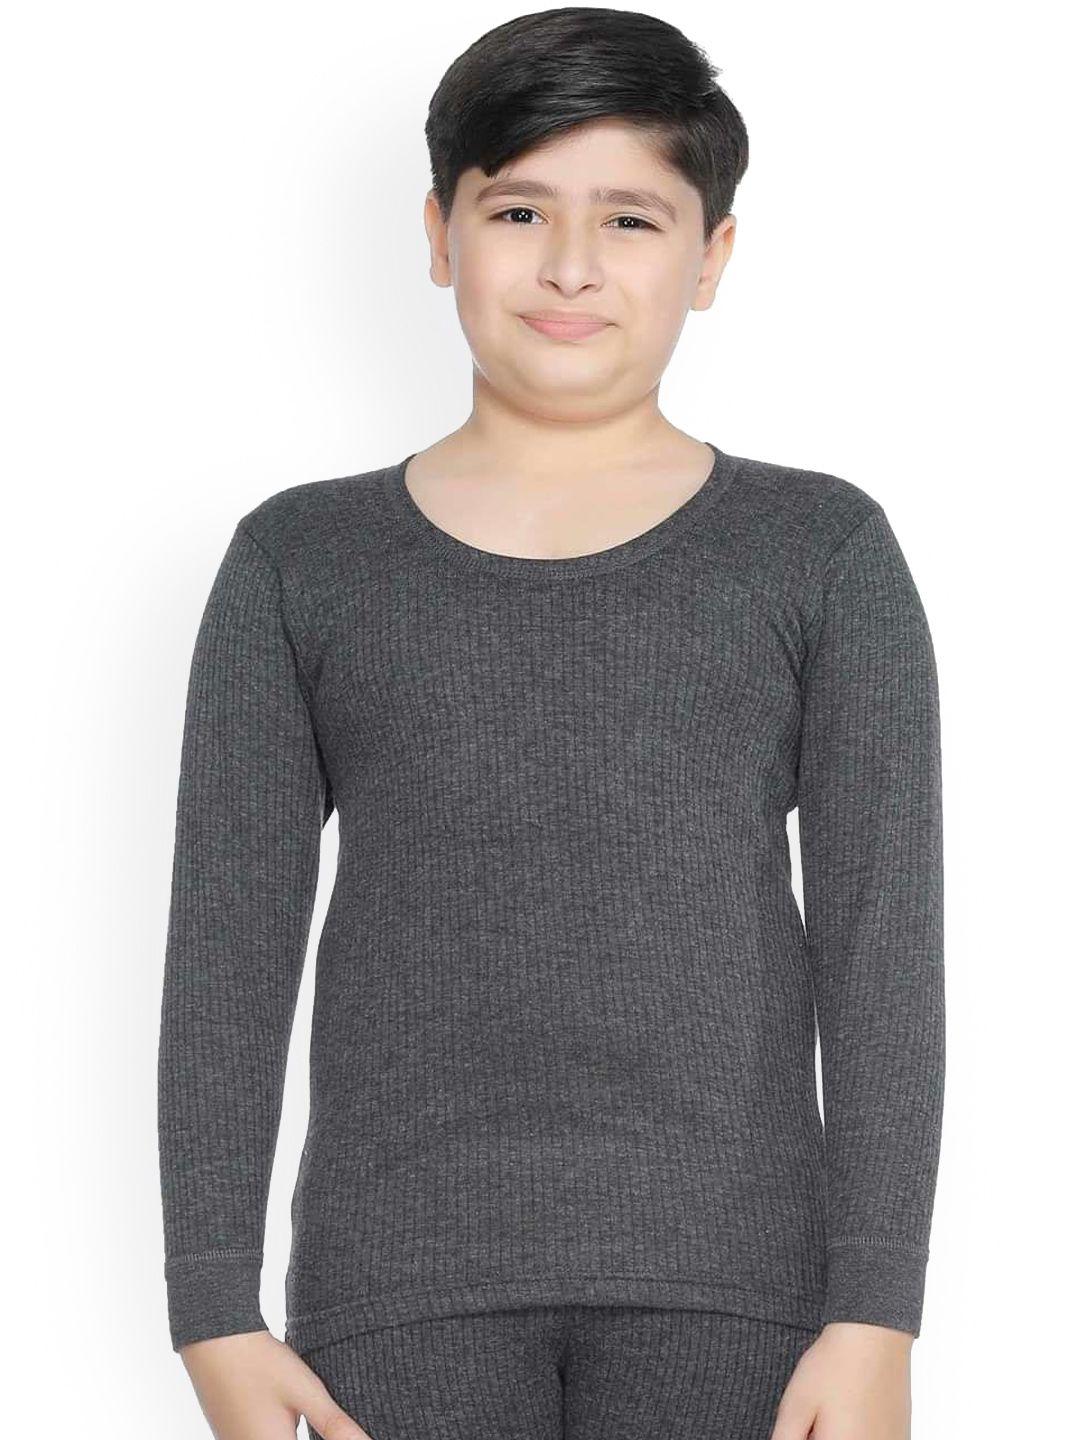 bodycare kids boys grey solid cotton thermal tops